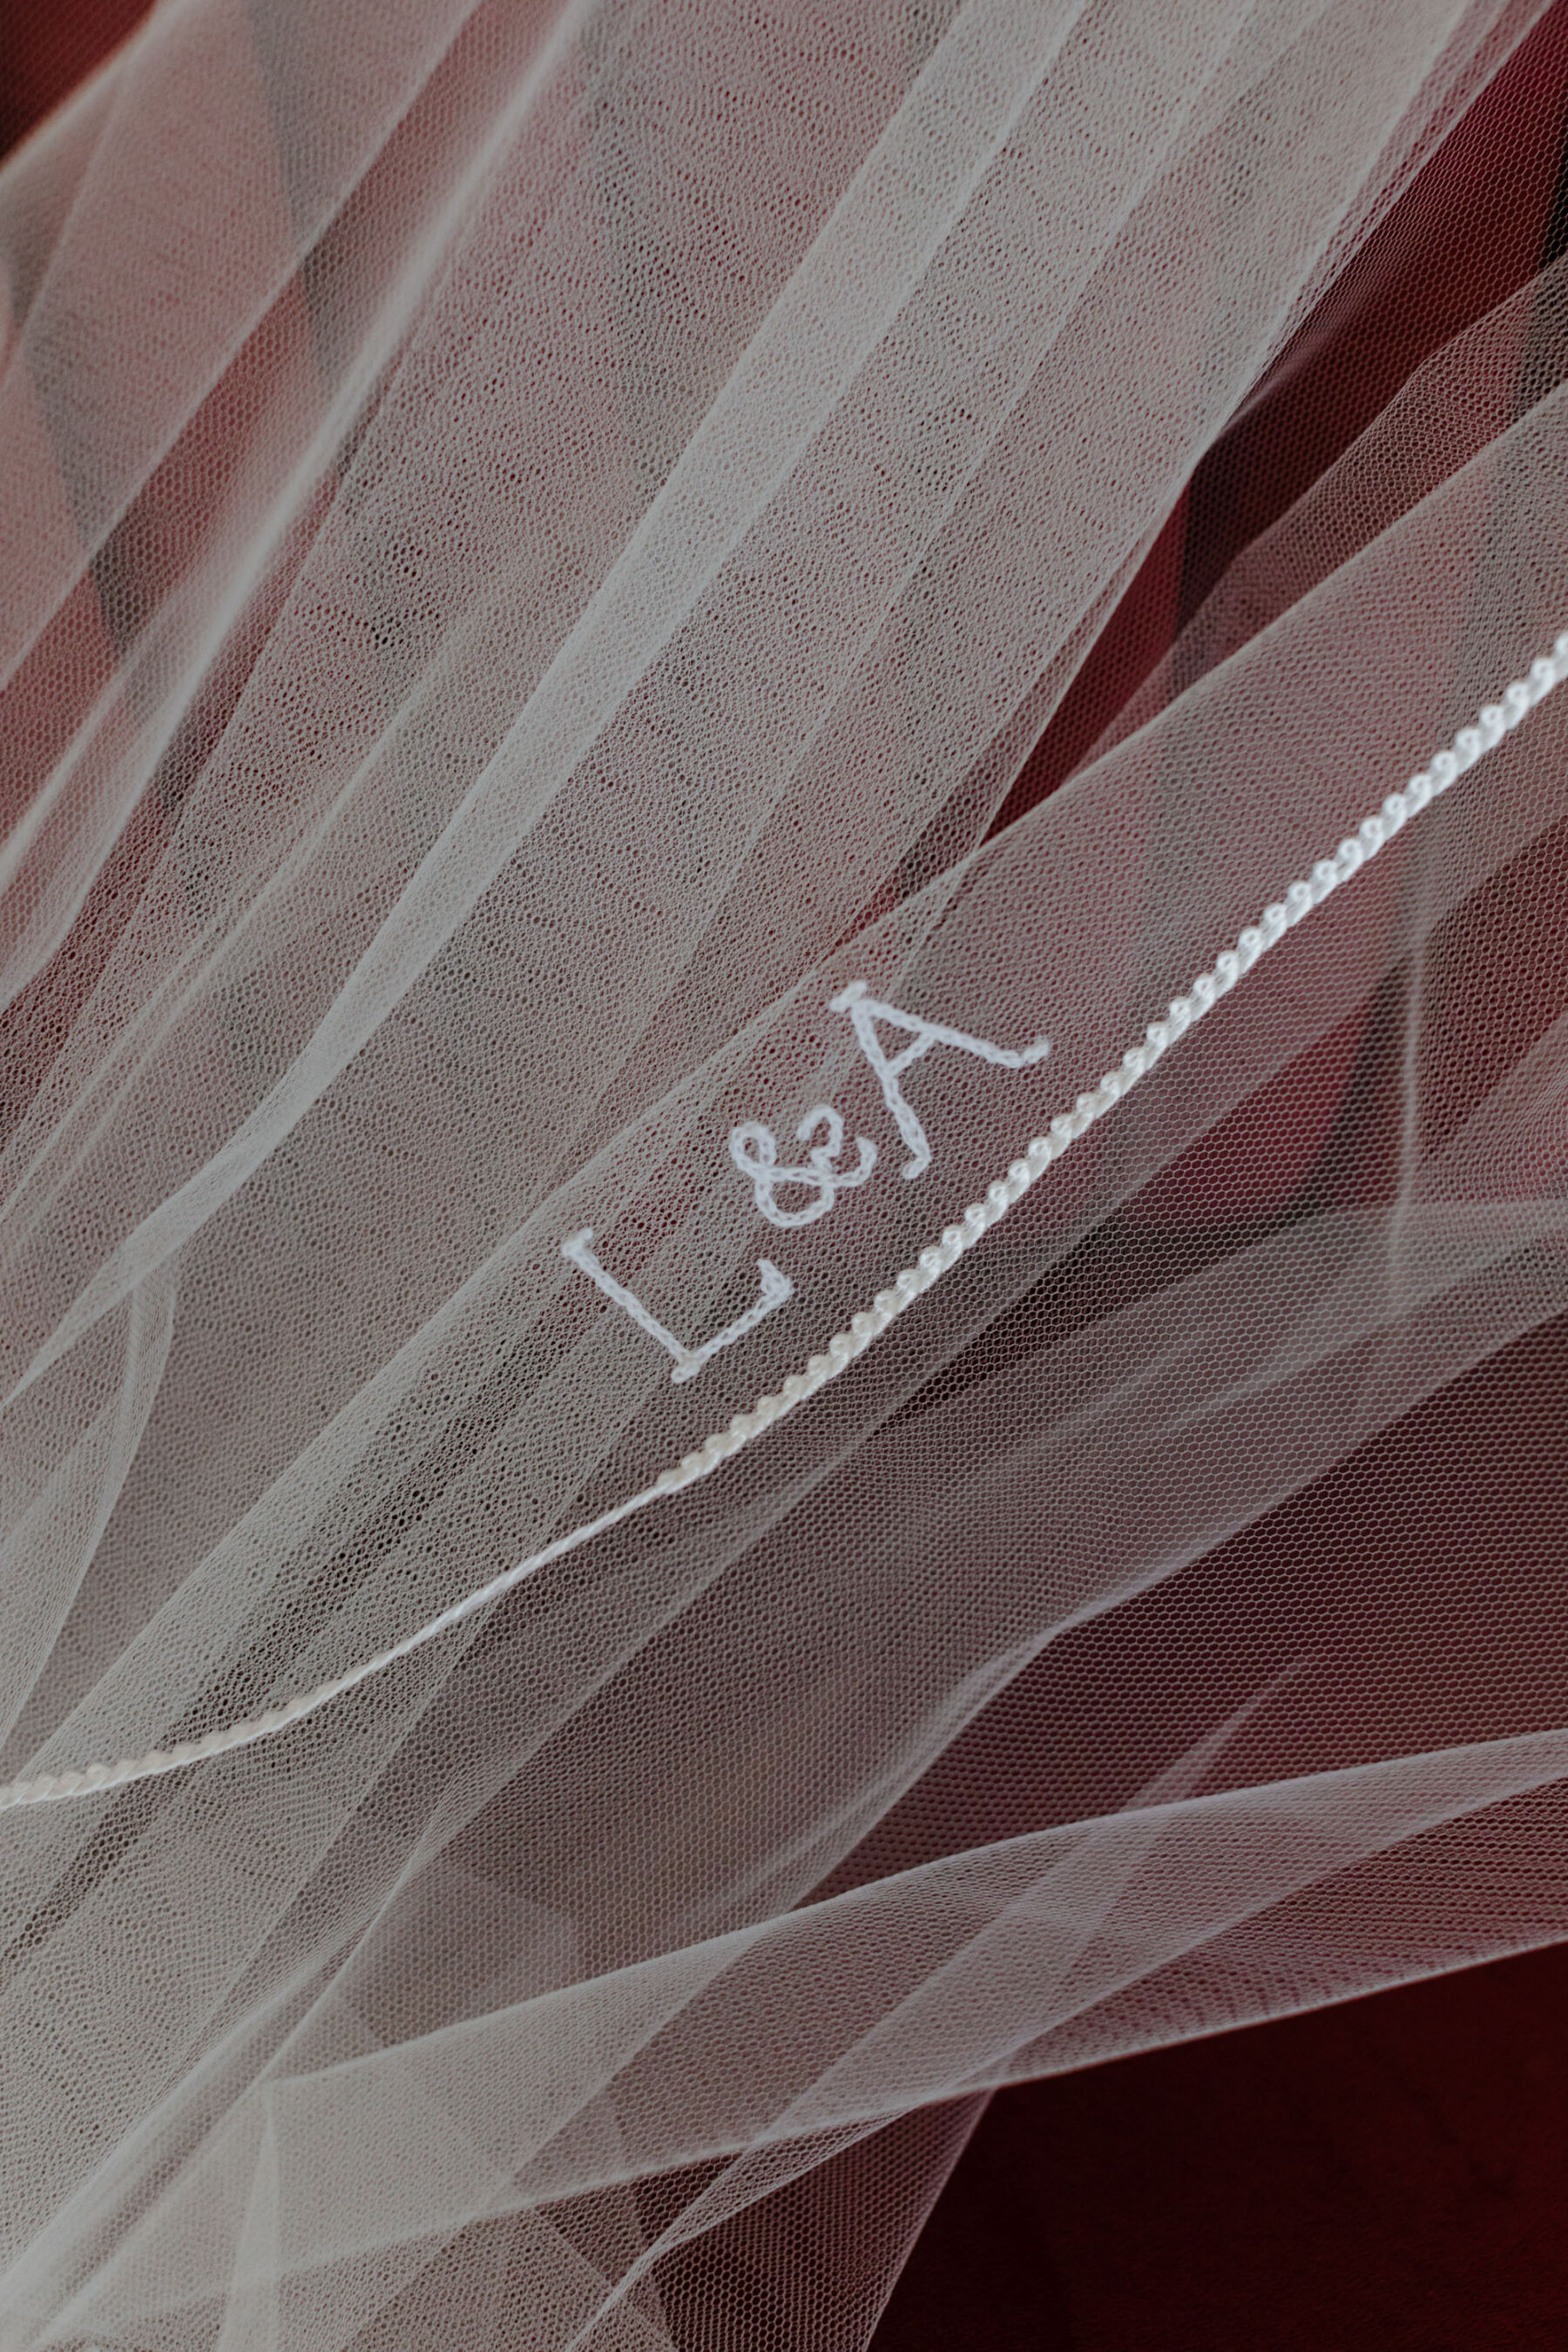 Wedding veil embroidered with initials of the bride and groom